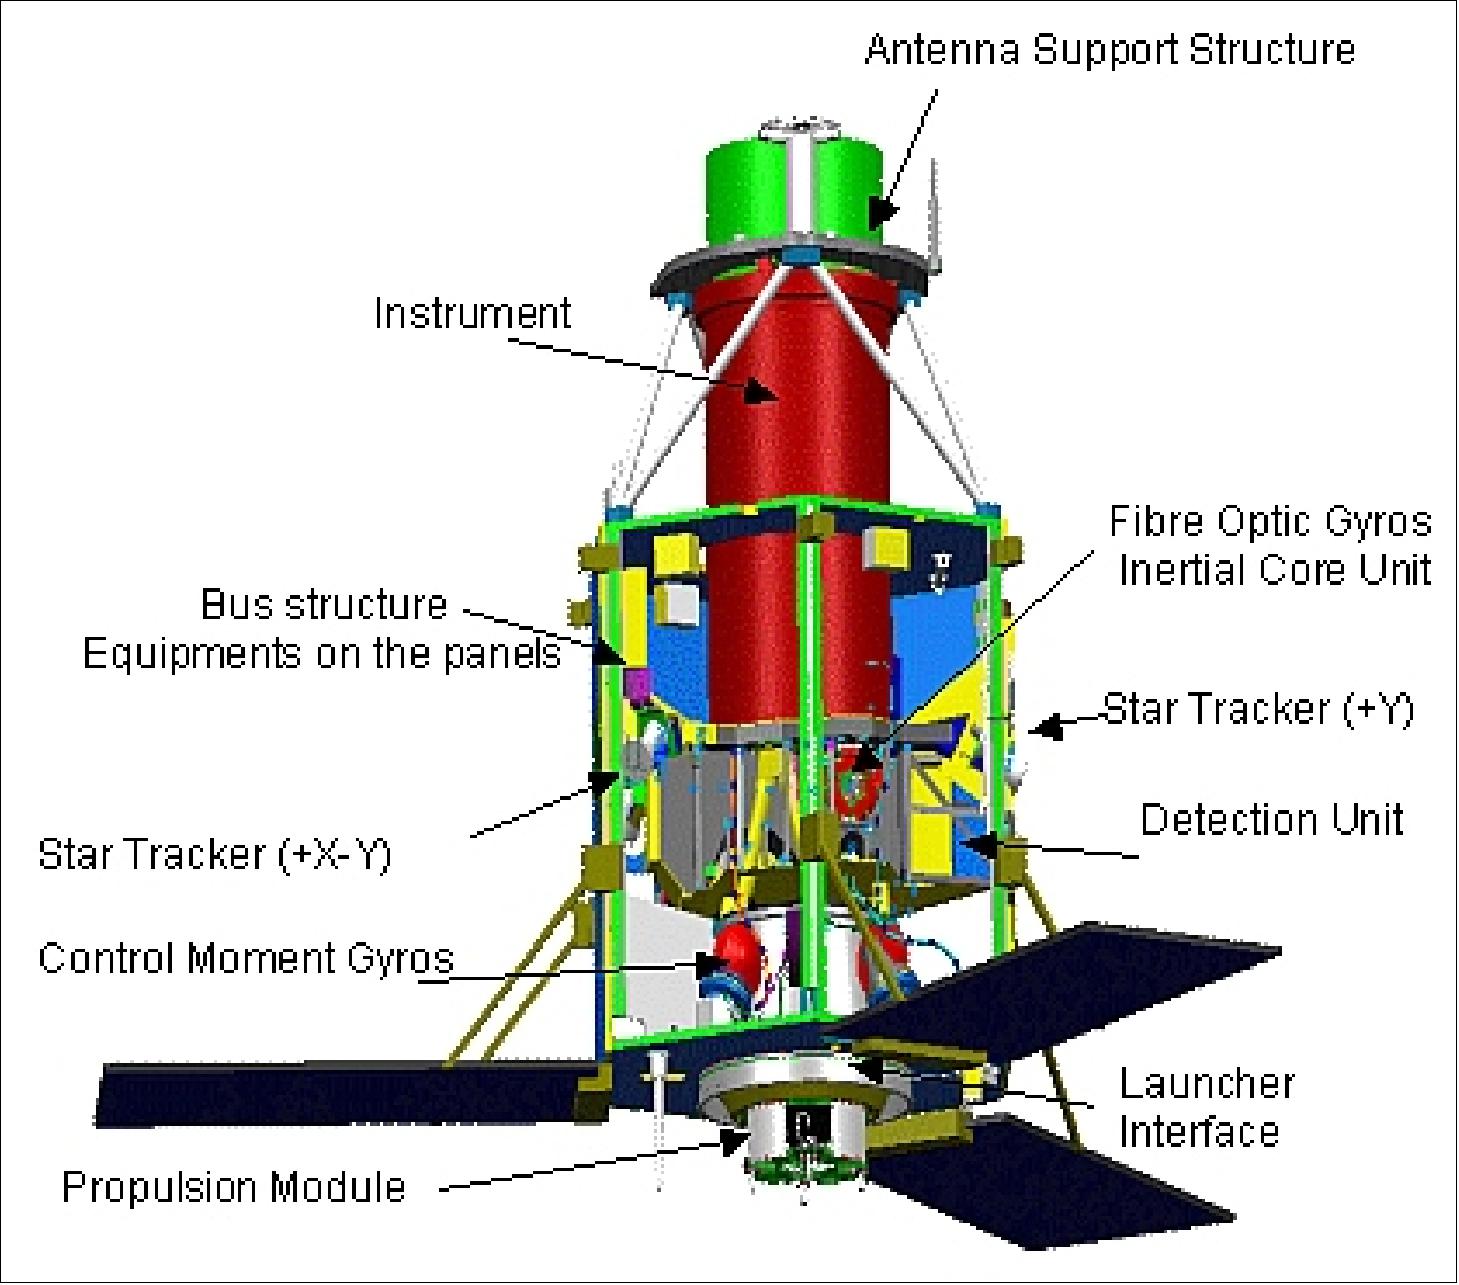 Figure 4: Interior structure of the Pleiades spacecraft and instrument accommodation (image credit: CNES)